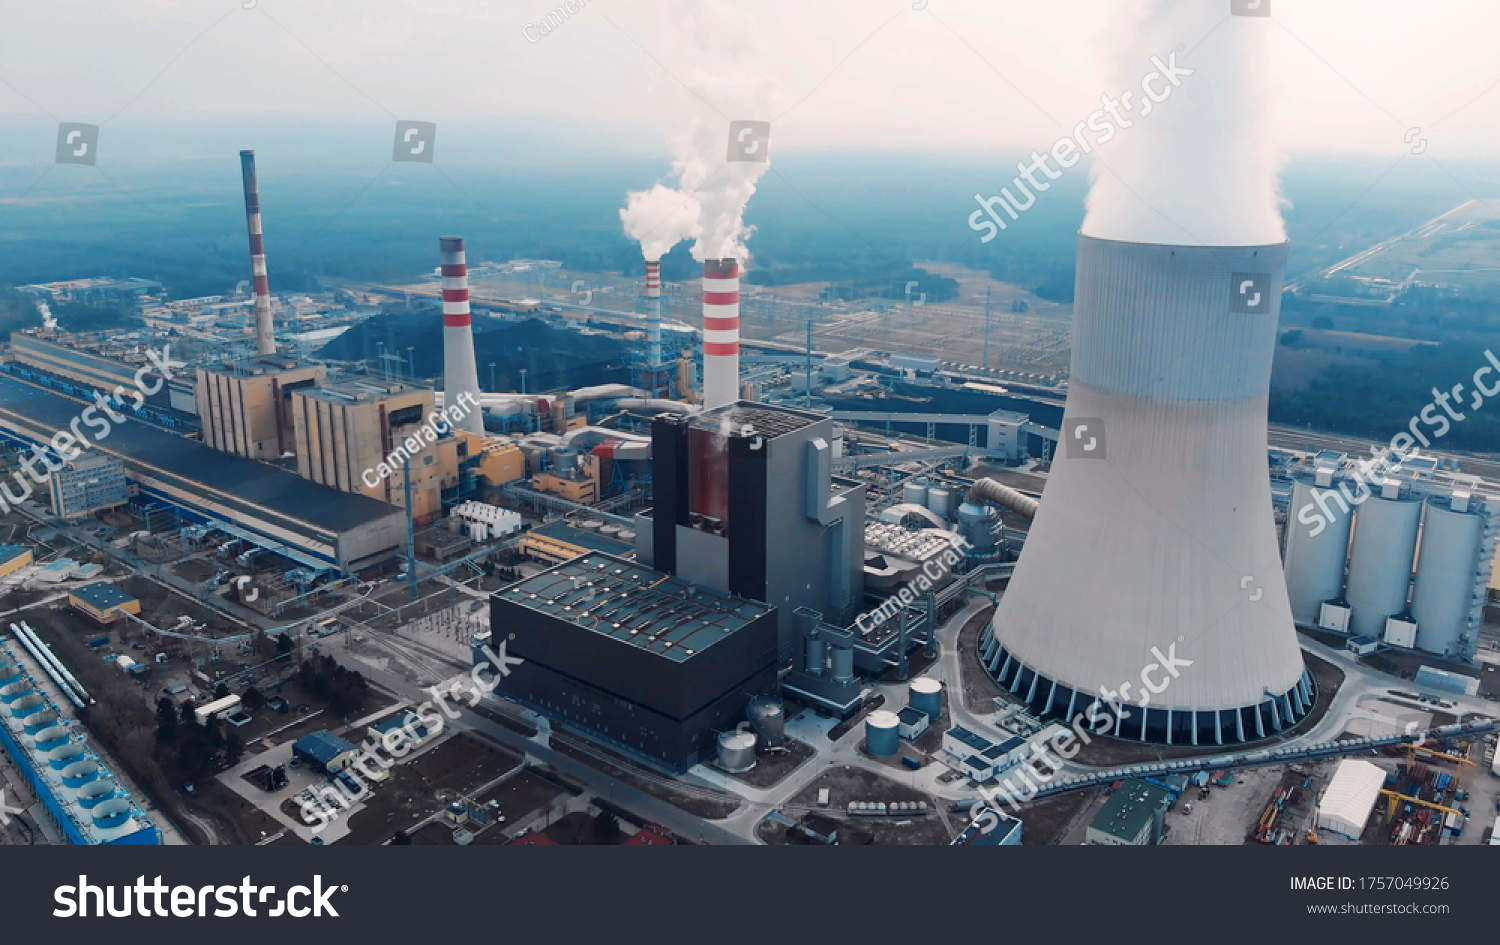 Aerial View Of Large Chimneys From The Kozienice Coal Power Plant In Poland - Swierze Gorne. #1757049926